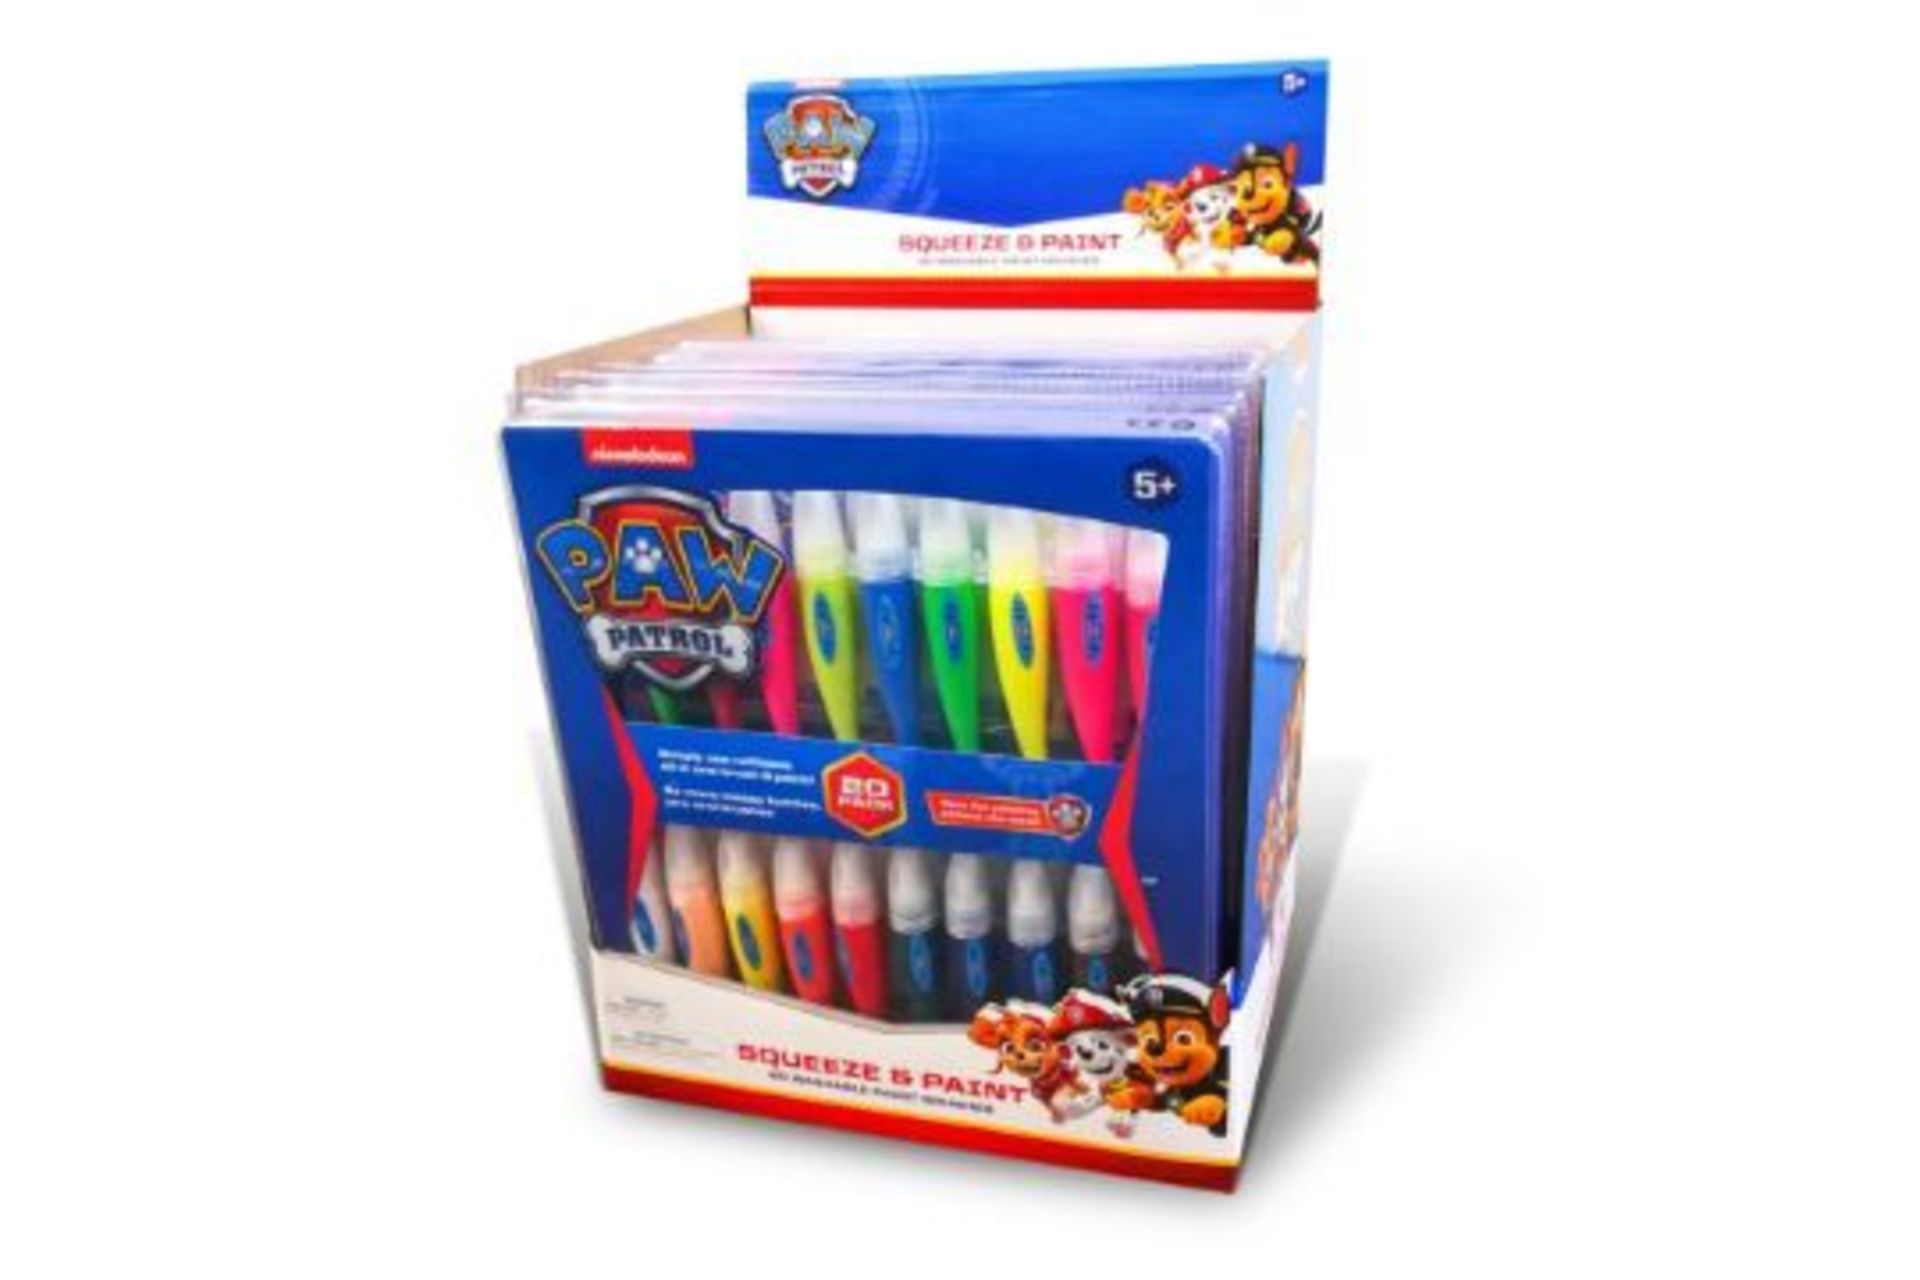 PALLET TO CONTAIN 72 X PACKS OF 20 NICKELODEON PAW PATROL SQUEEZE & PAINT WASHABLE PAINT BRUSH